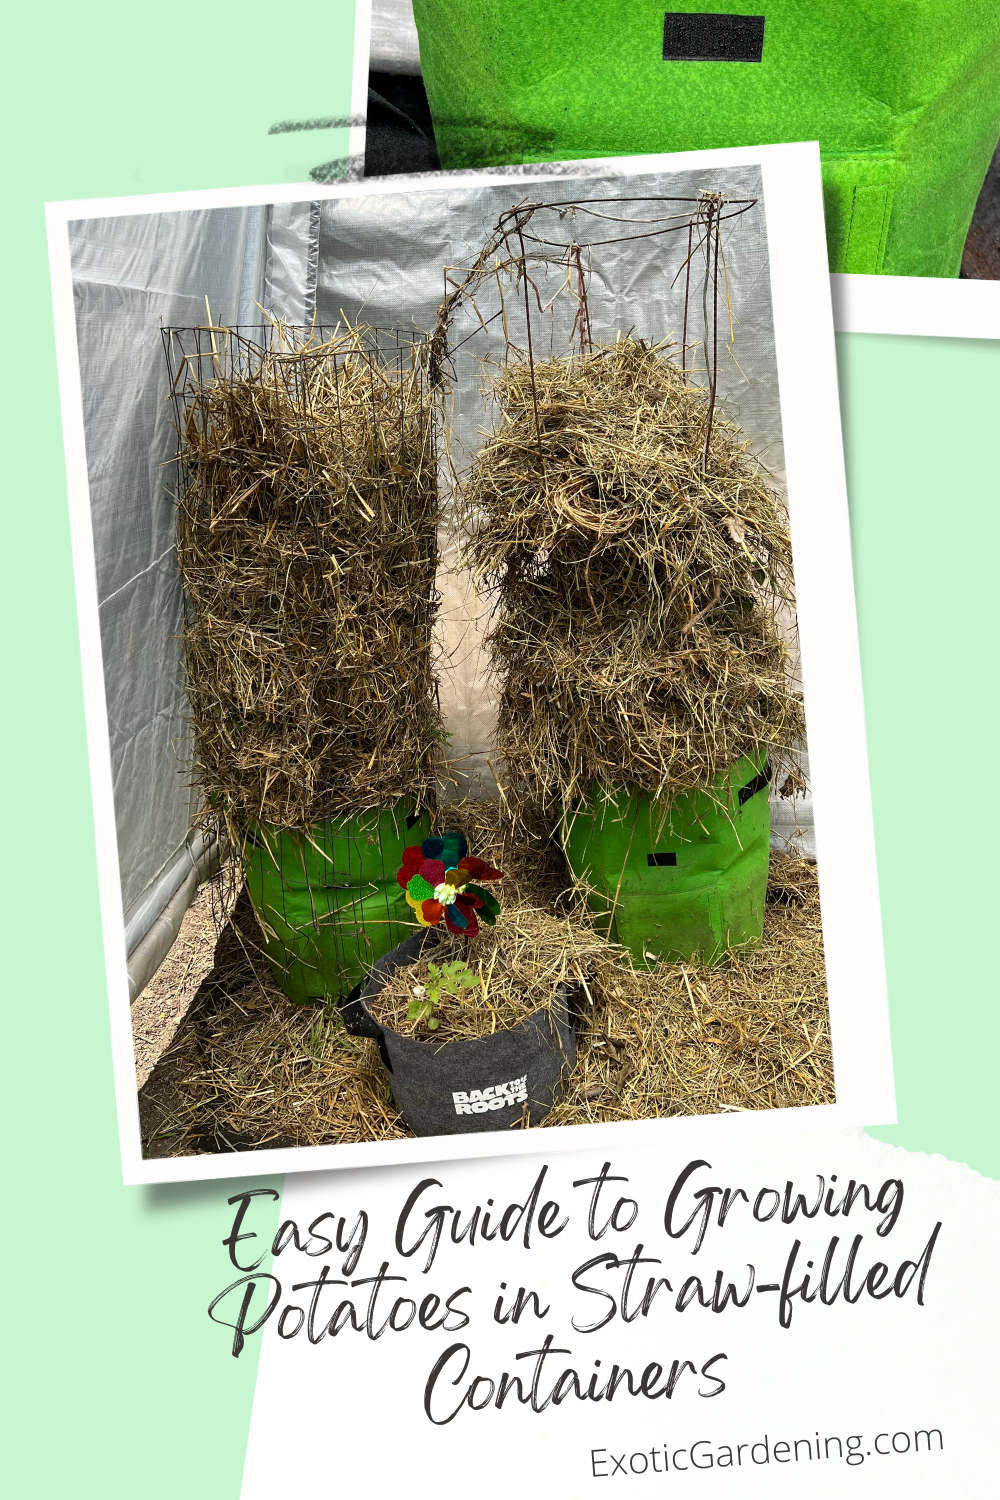 Potatoes growing in grow bags filled with straw that use tomato cages to contain the straw as the potatoes grow upward.